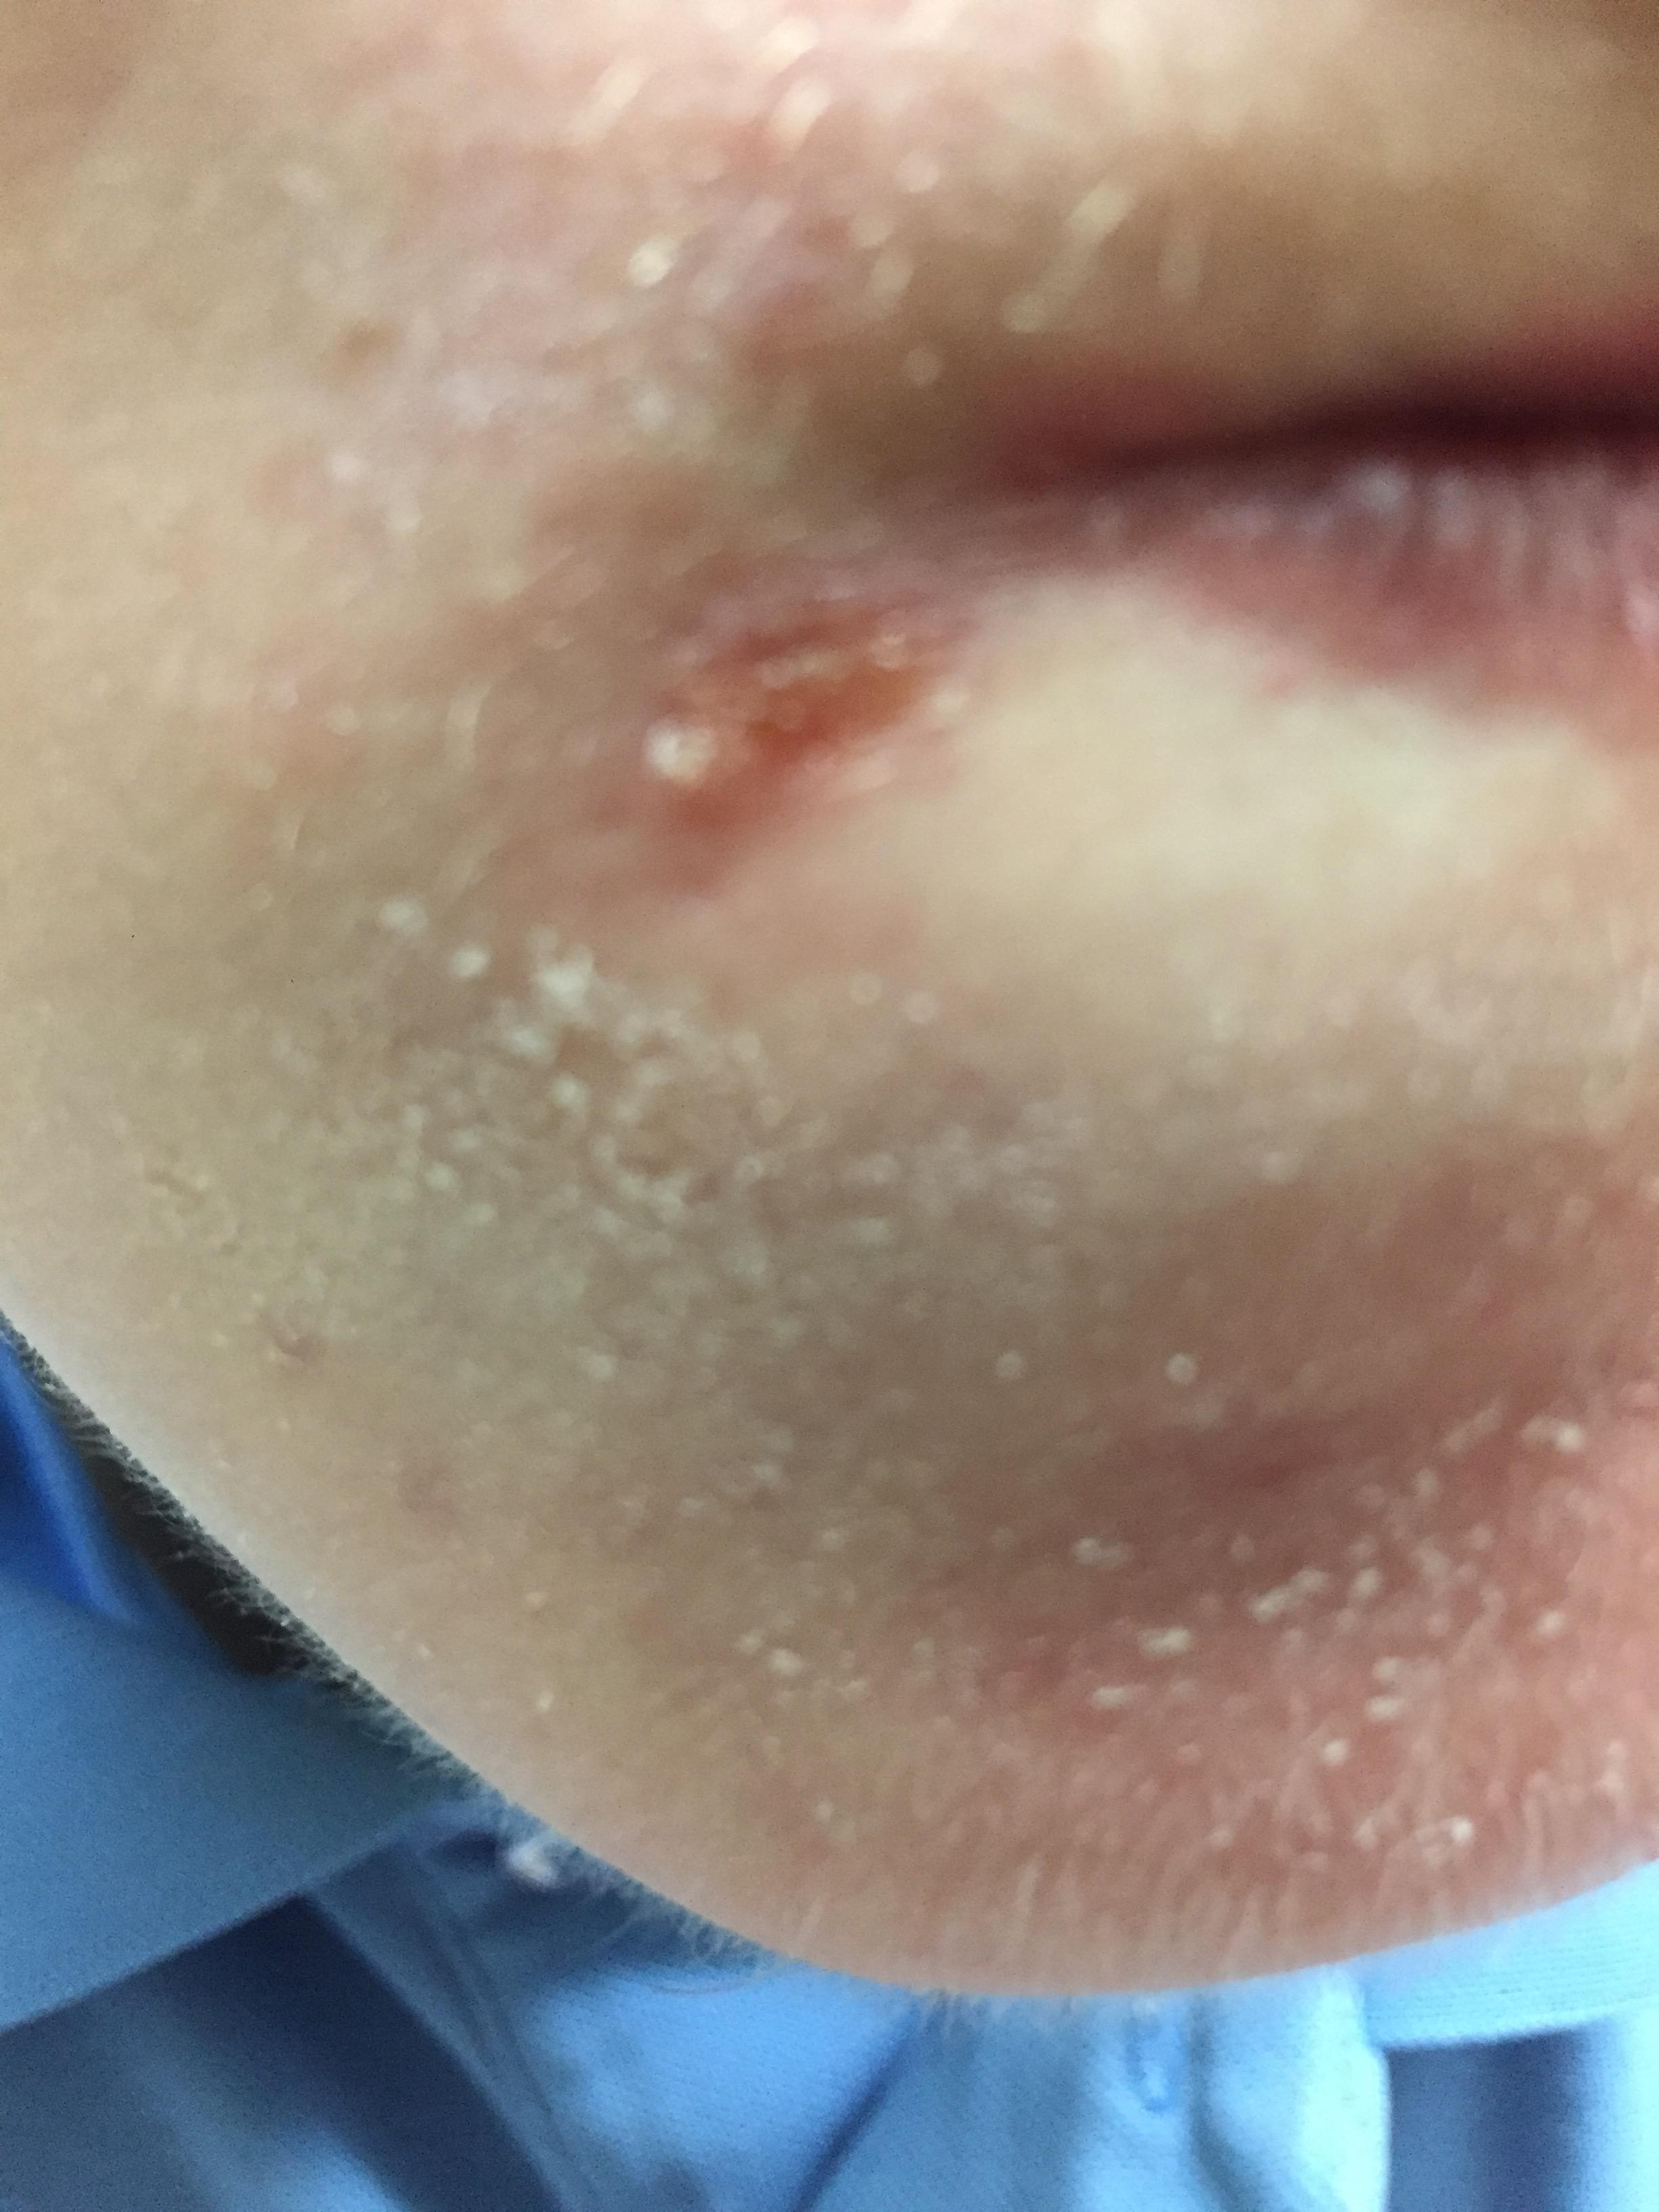 Little White Bumps That Turn Into Pimples General Acne Discussion